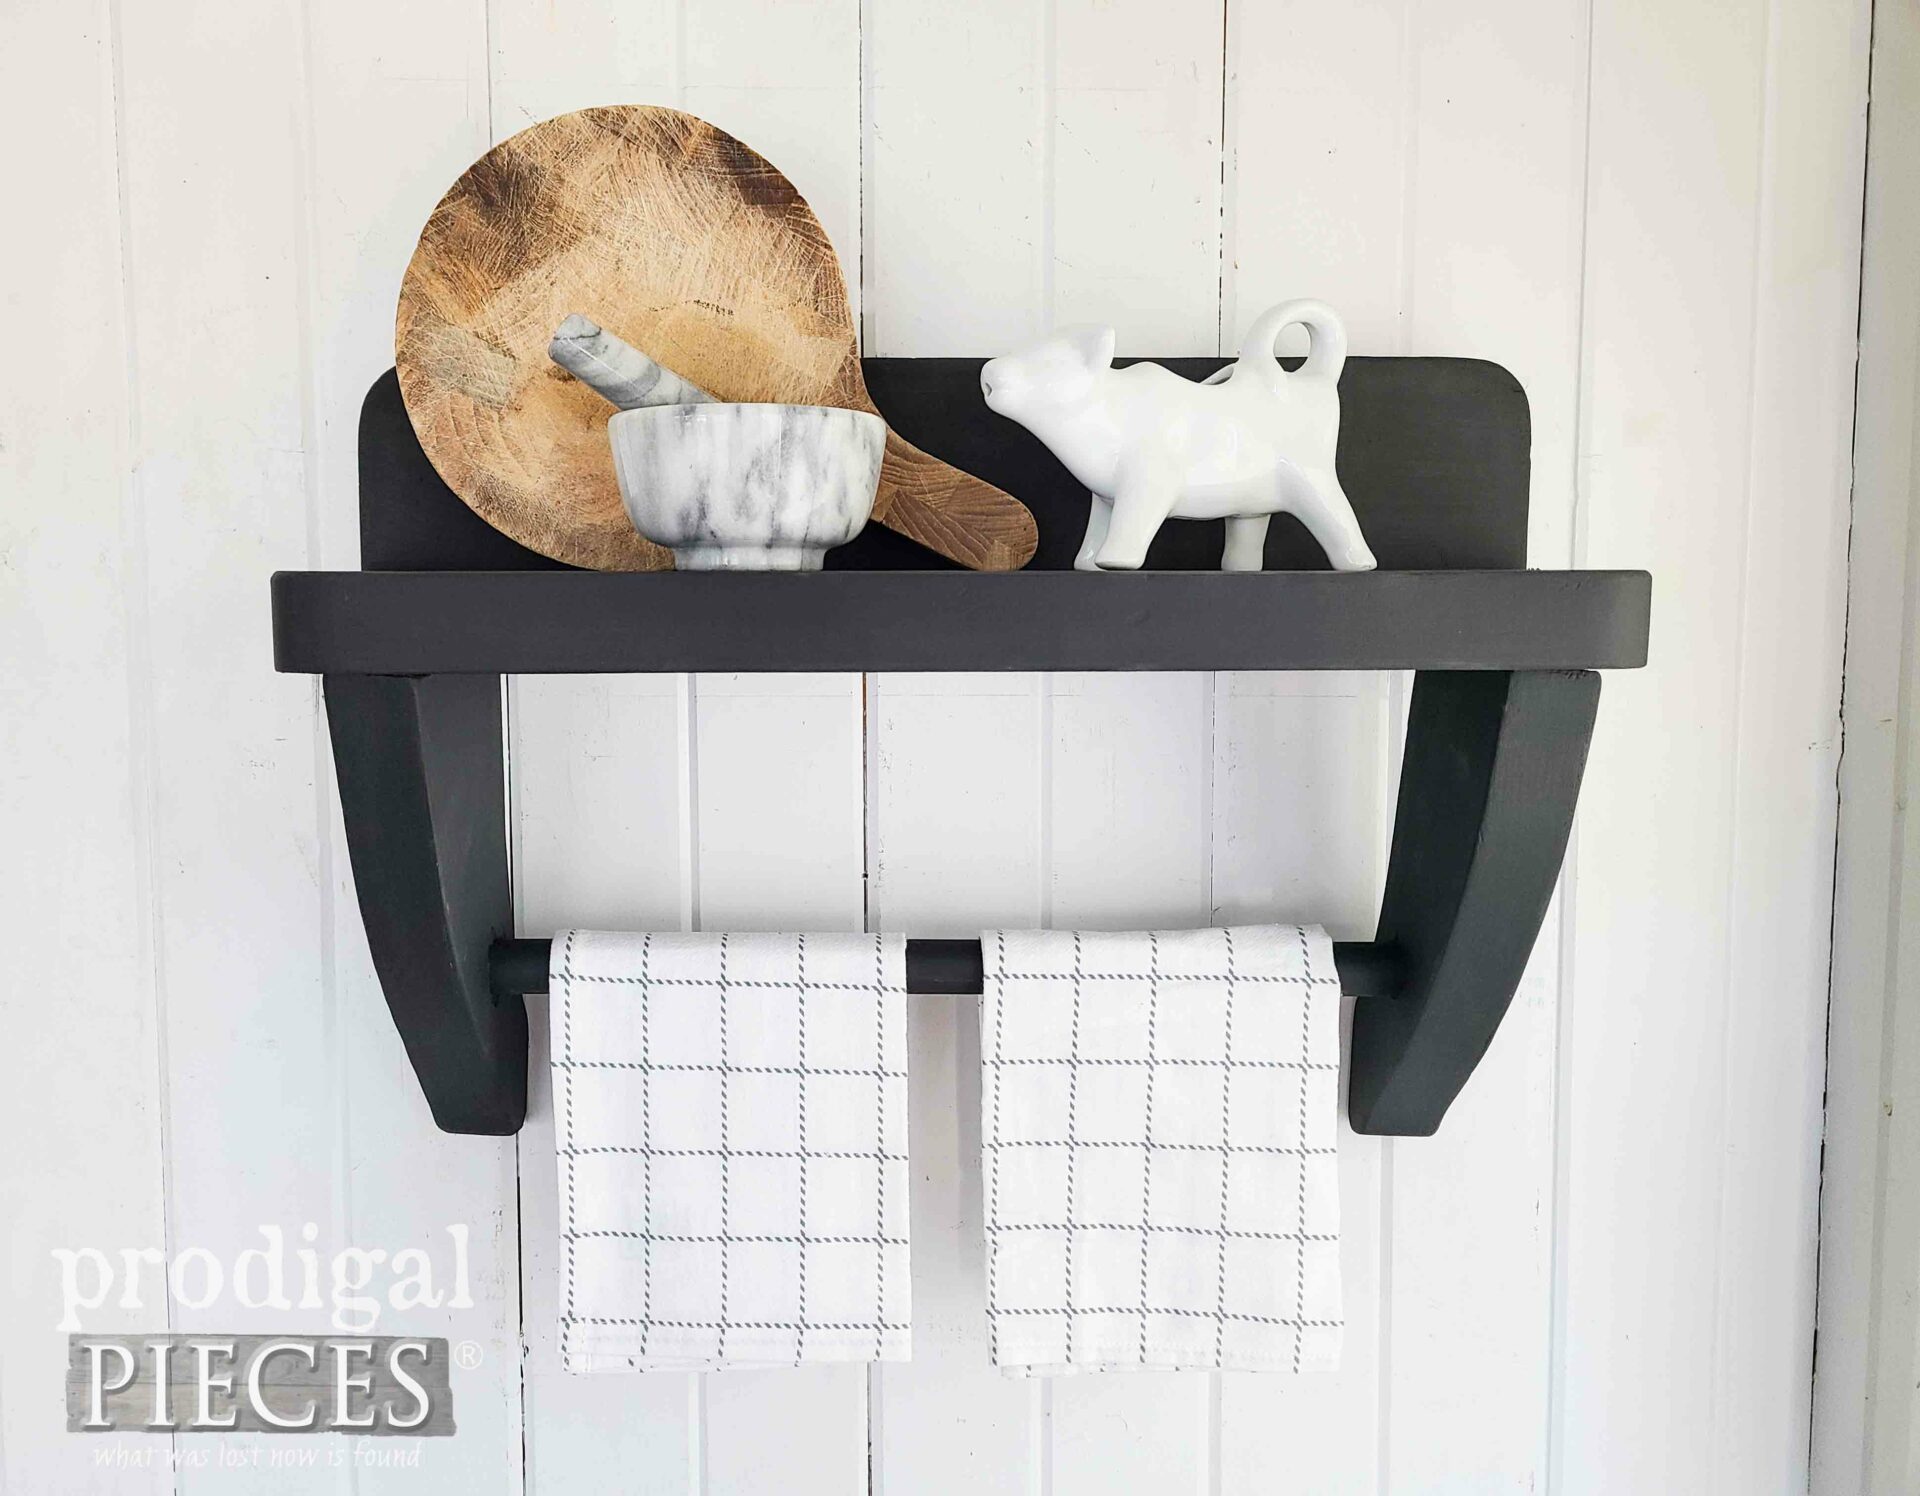 Upcycled Shelf for Farmhouse Style from Thrifted Table by Larissa of Prodigal Pieces | prodigalpieces.com #prodigalpieces